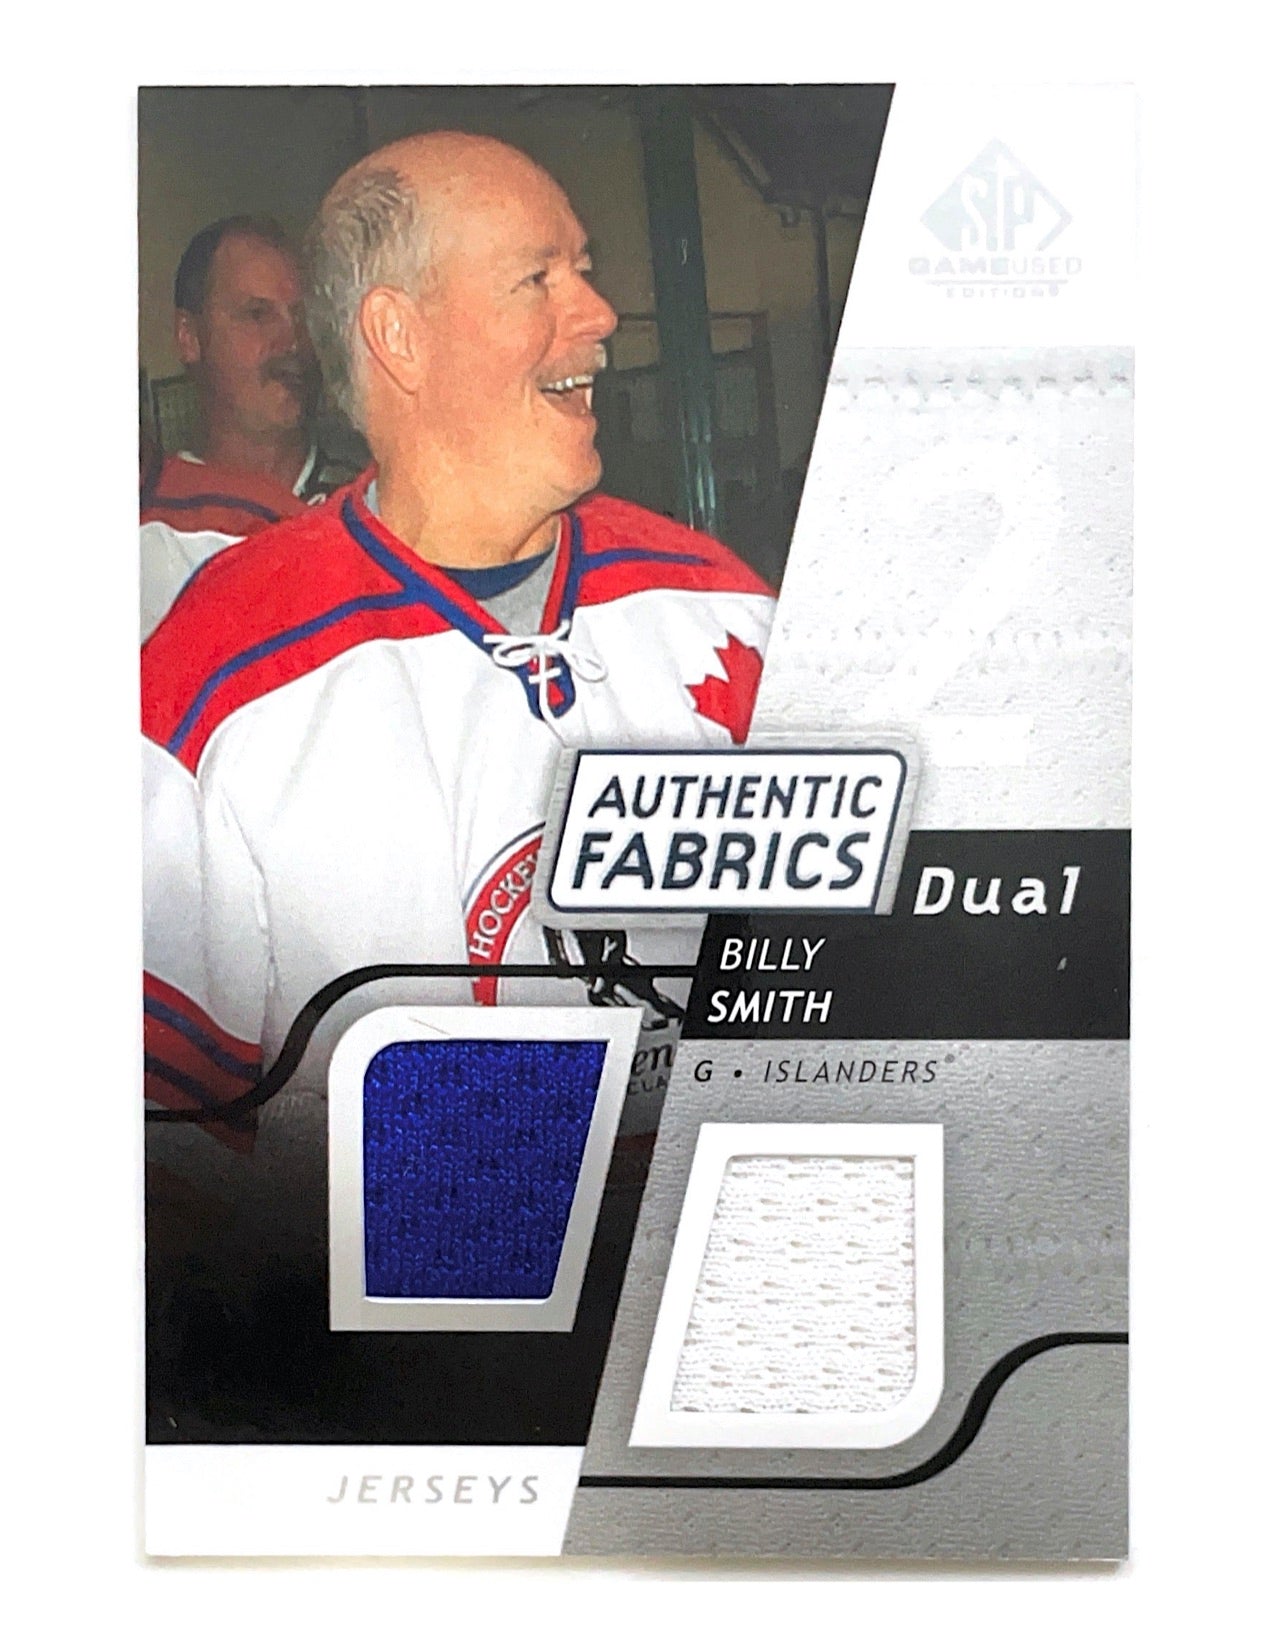 Billy Smith 2008-09 Upper Deck SP Game Used Authentic Fabrics Dual Jersey #AF-BS